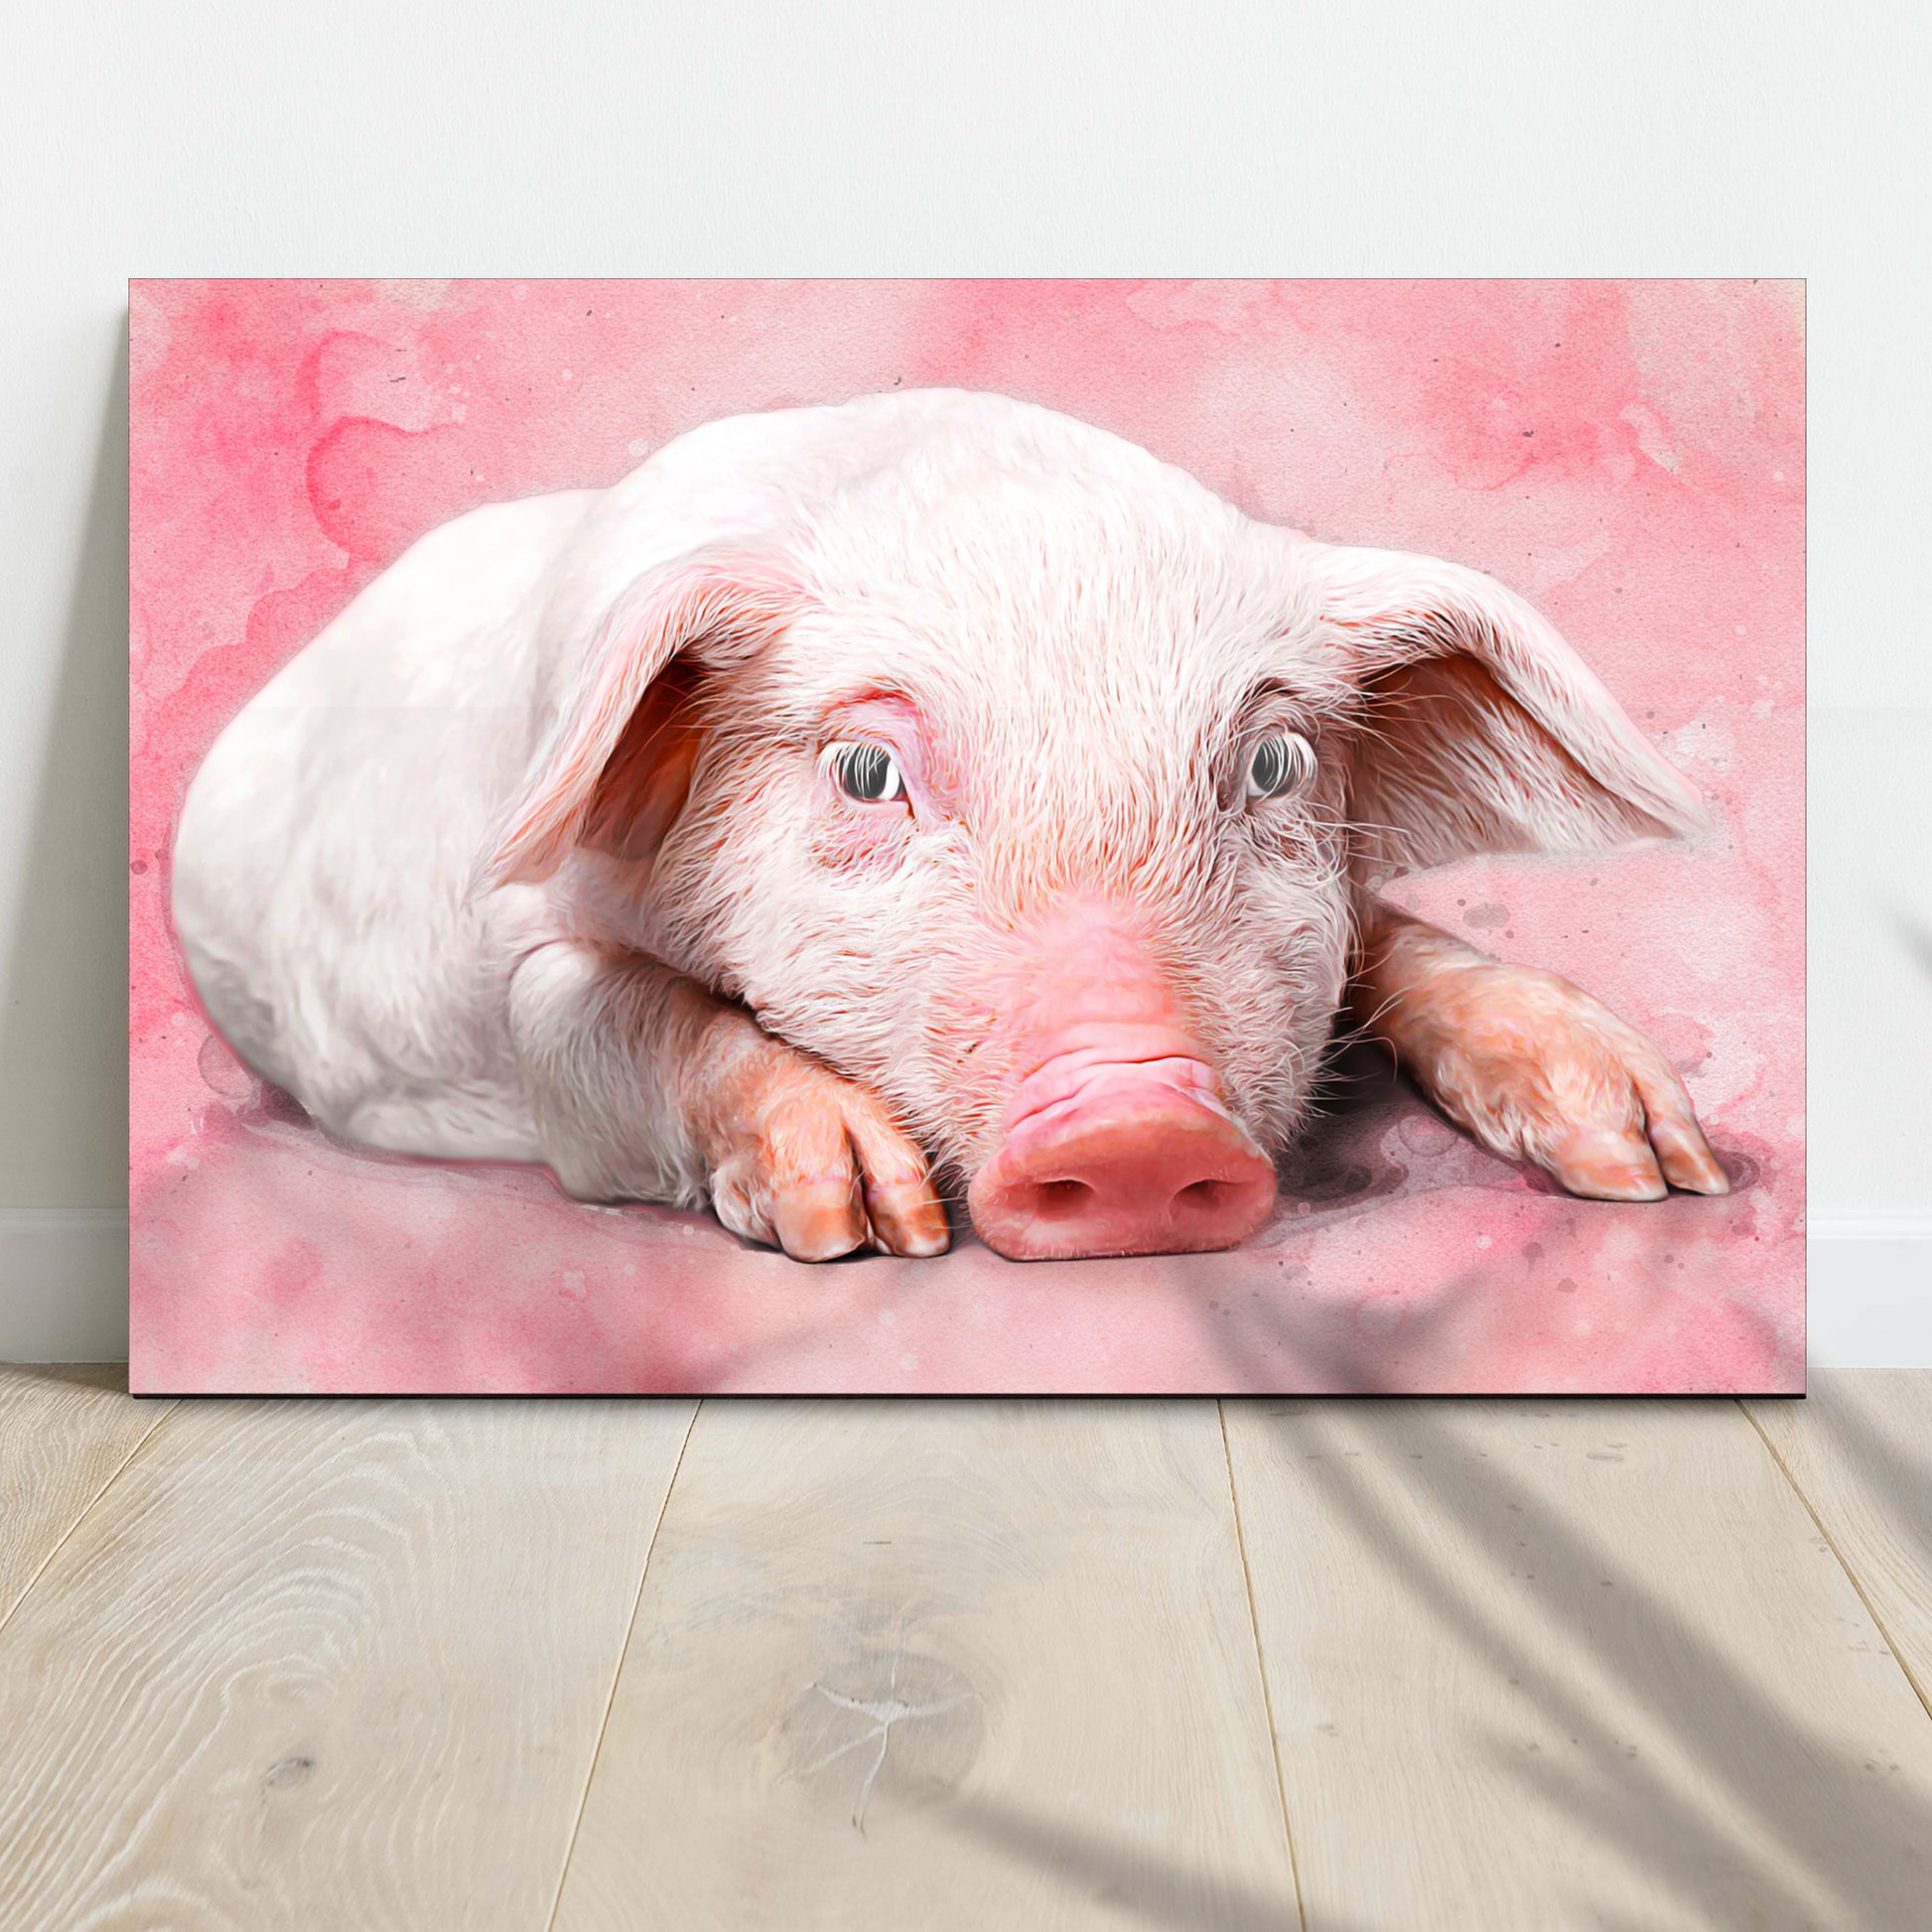 Lazy Pig Portrait Canvas Wall Art - Image by Tailored Canvases